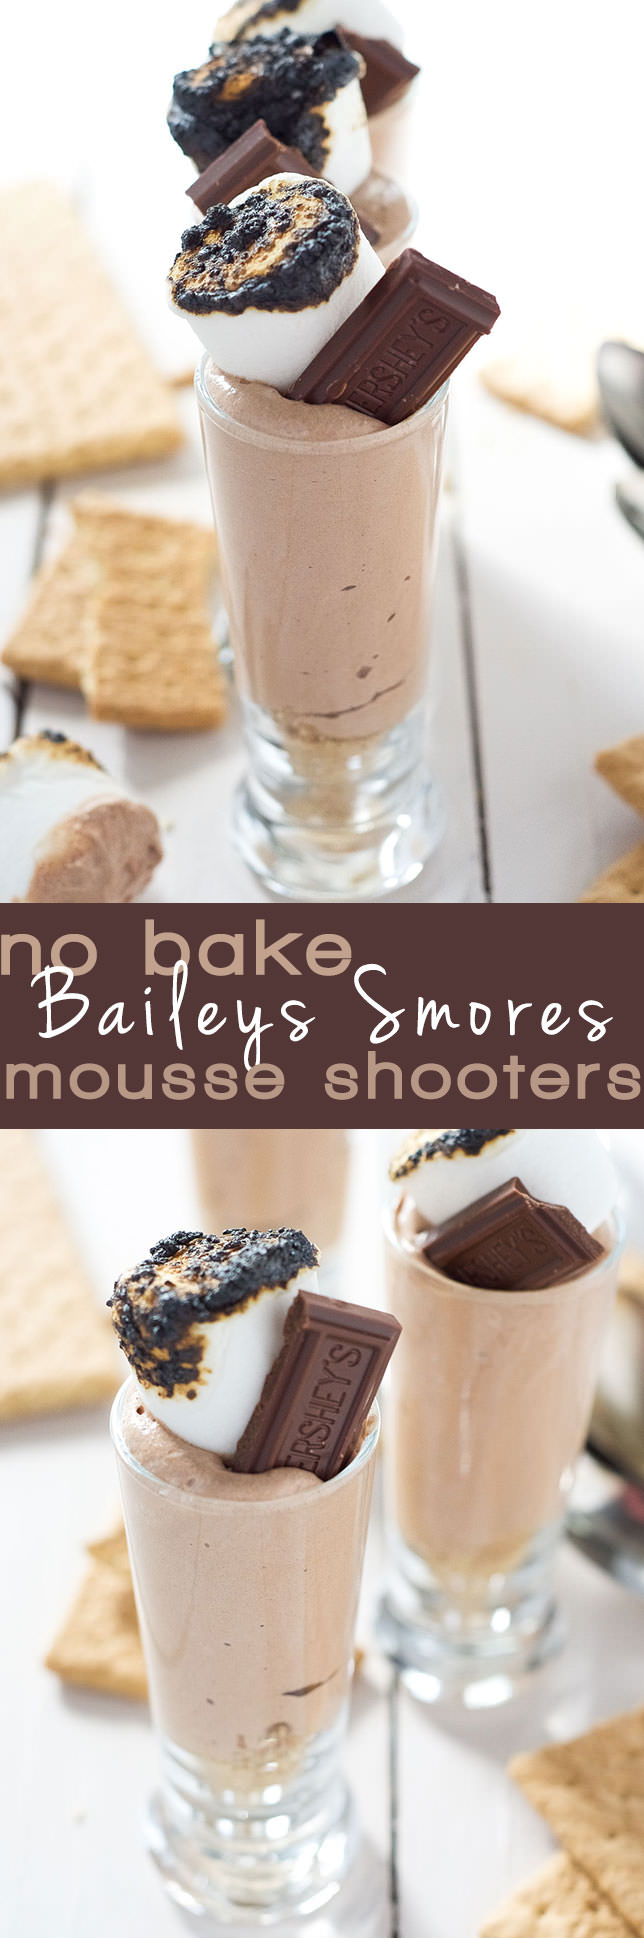 No Bake Baileys Smores Mousse Cups are a simple dessert that is filled with espresso and chocolate mousse and topped with a toasted marshmallow! A dessert you will have no idea is under 150 calories!